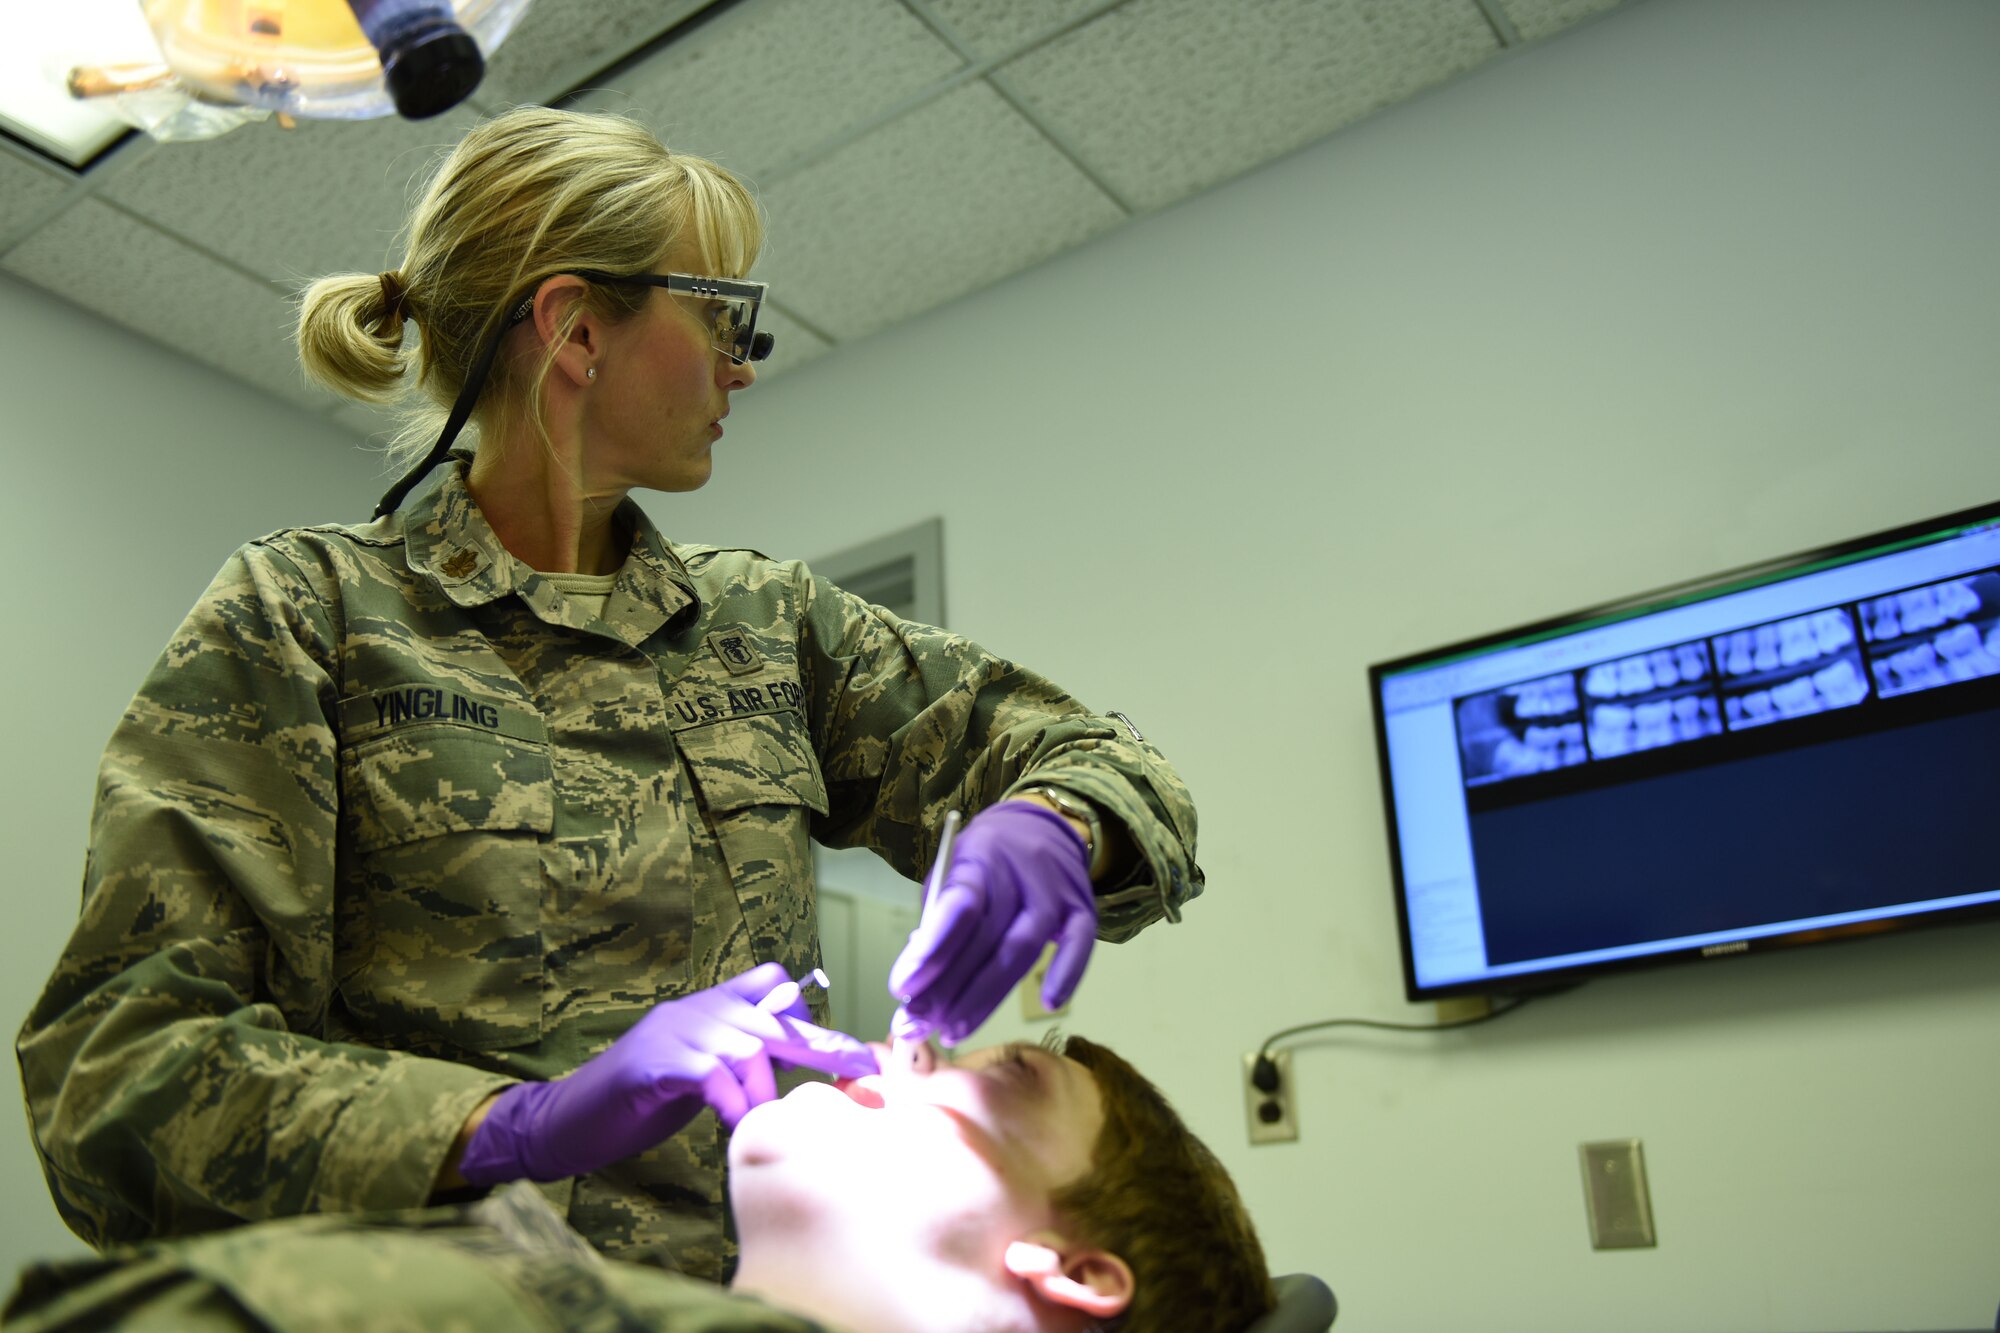 Maj. Nicole Yingling, 193rd Special Operations Wing Medical Group dentist, examines an Airman’s teeth during a routine dental check-up at the wing's Middletown, Pennsylvania, location. The wing’s flying mission annually requires more than 250 flight physicals and more than 800 occupational health exams be conducted by medical group personnel. (U.S. Air National Guard photo by Senior Airman Ethan Carl/Released)